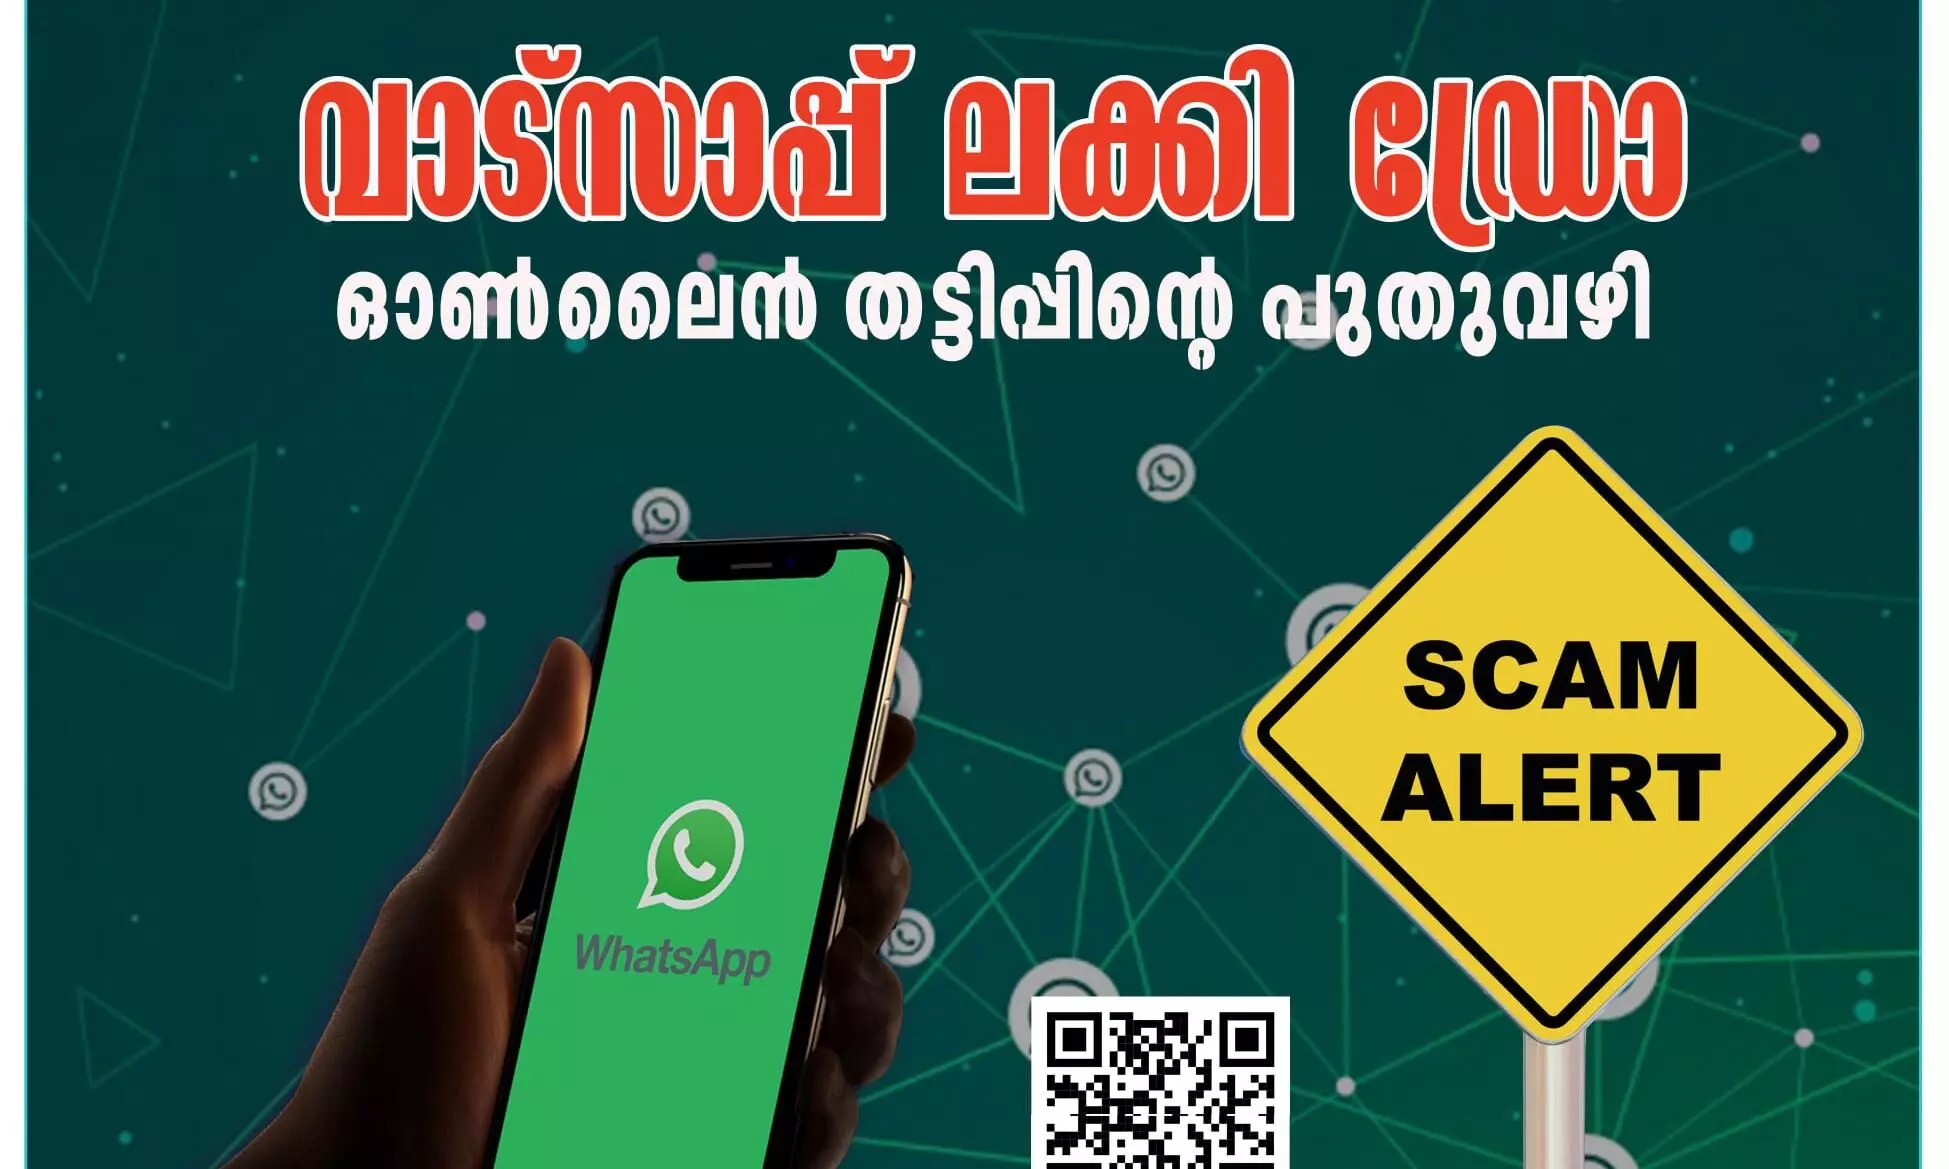 whats app lucky draw scam kerala police